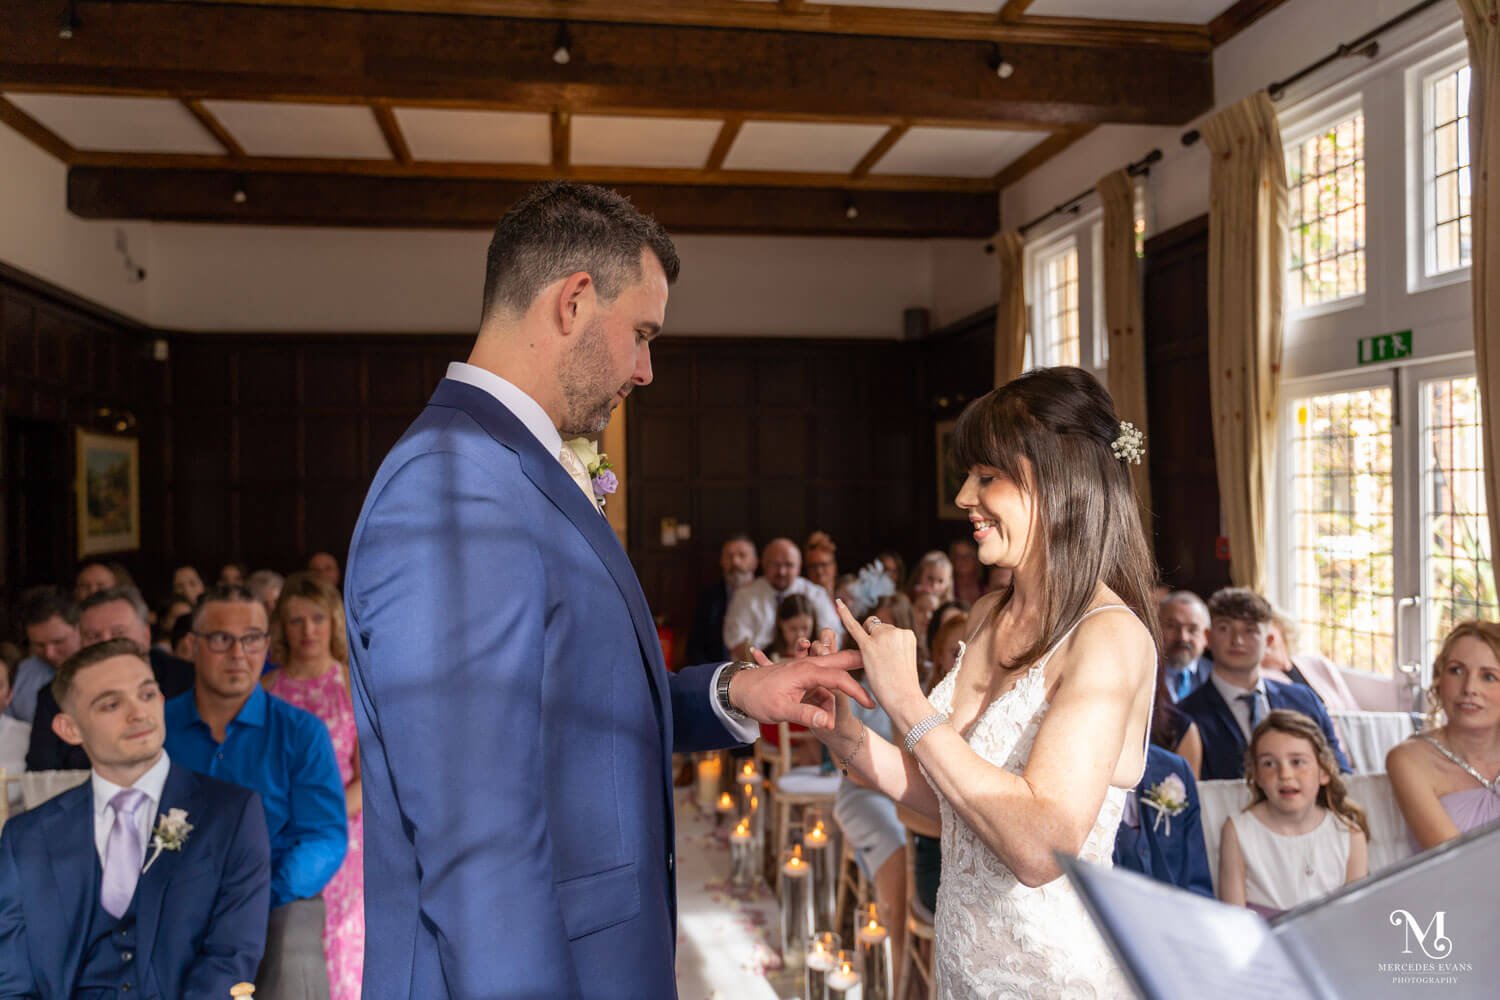 the bride puts the groom's wedding ring on his finger during their wedding ceremony in the Oak room at Cantley House Hotel